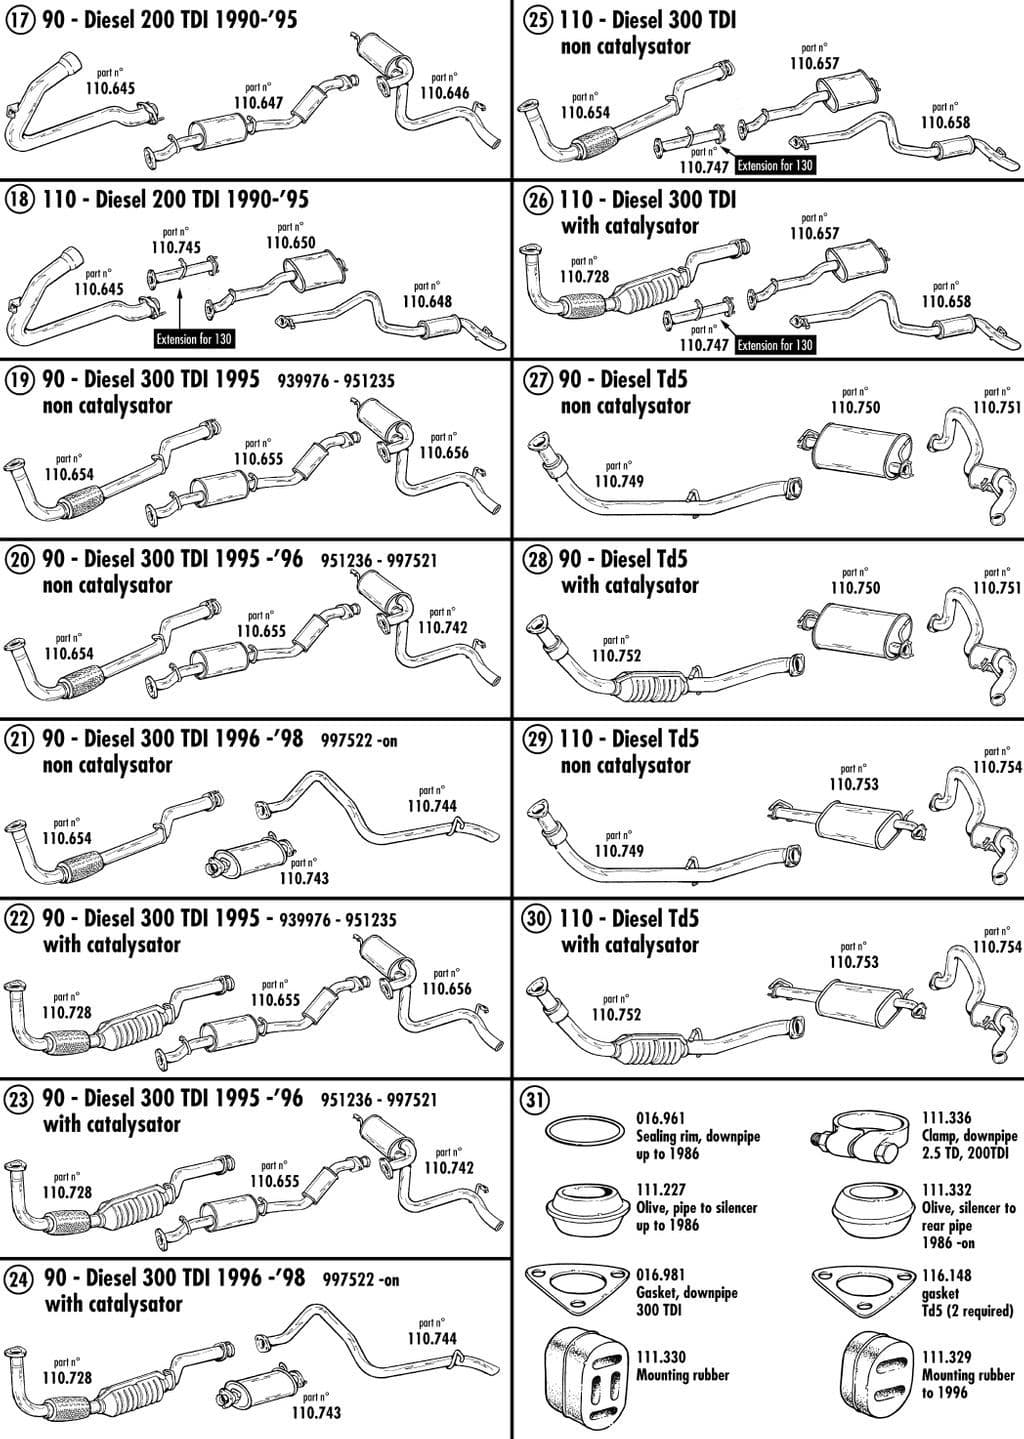 Land Rover Defender 90-110 1984-2006 - Clamps, flanges & hangers - Exhaust systems & fittings - 1